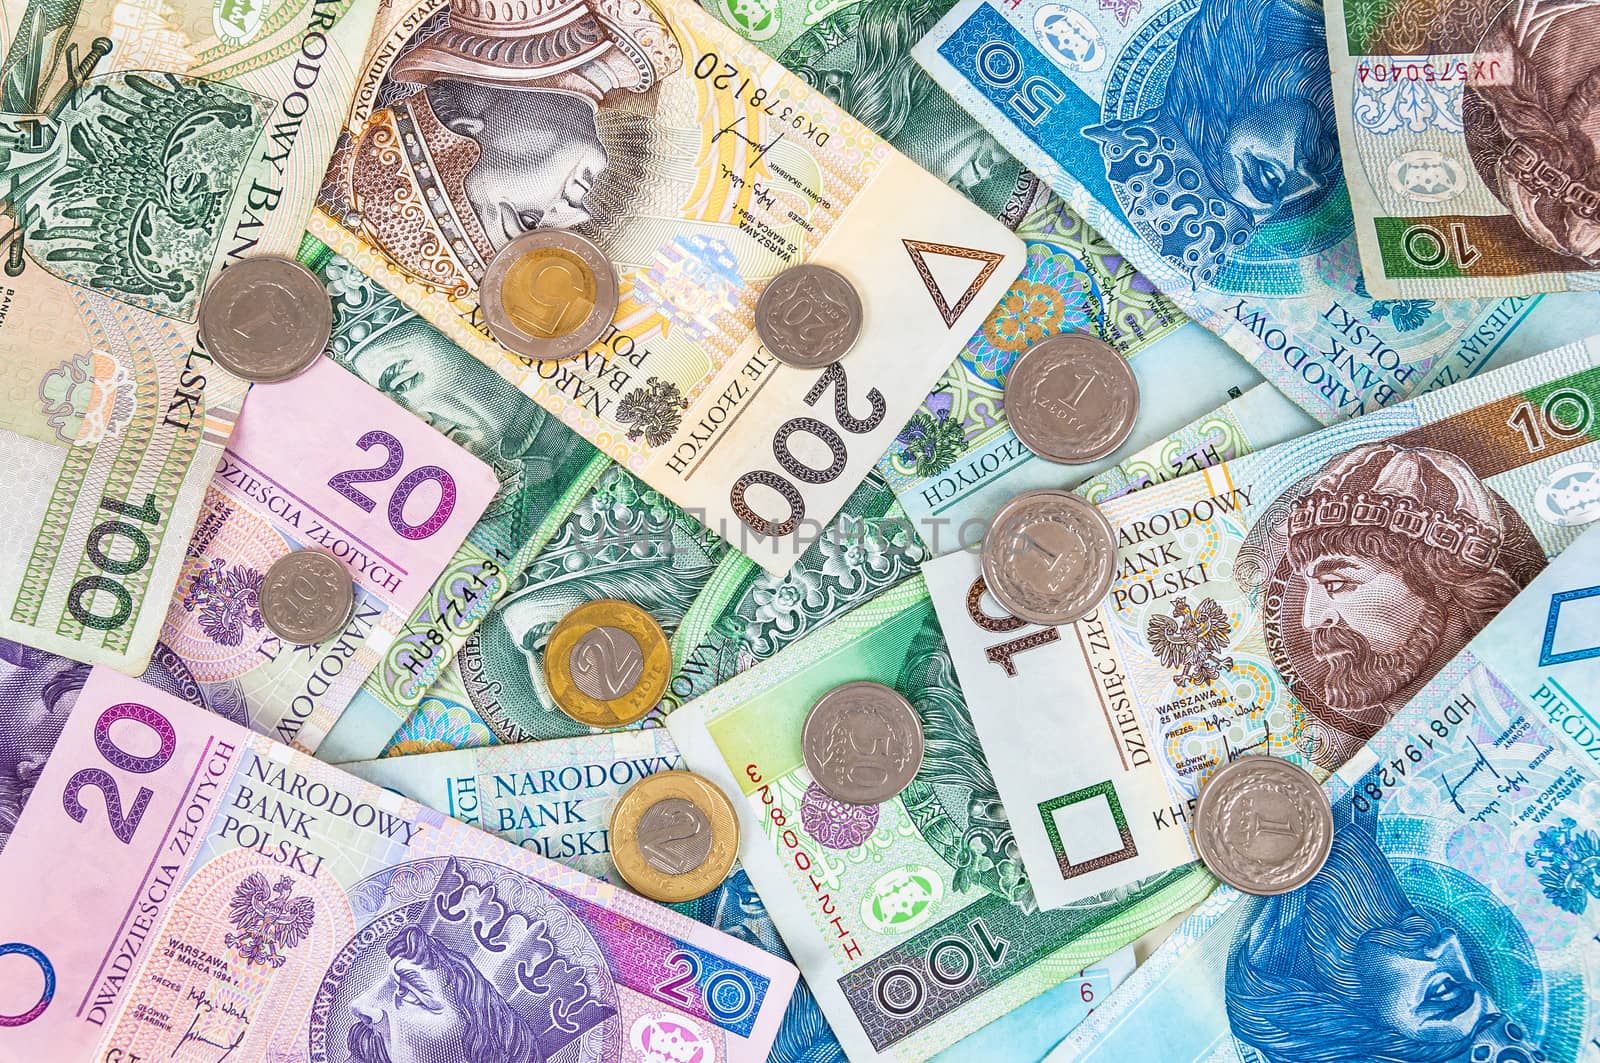 Background of polish banknotes and coins by mkos83